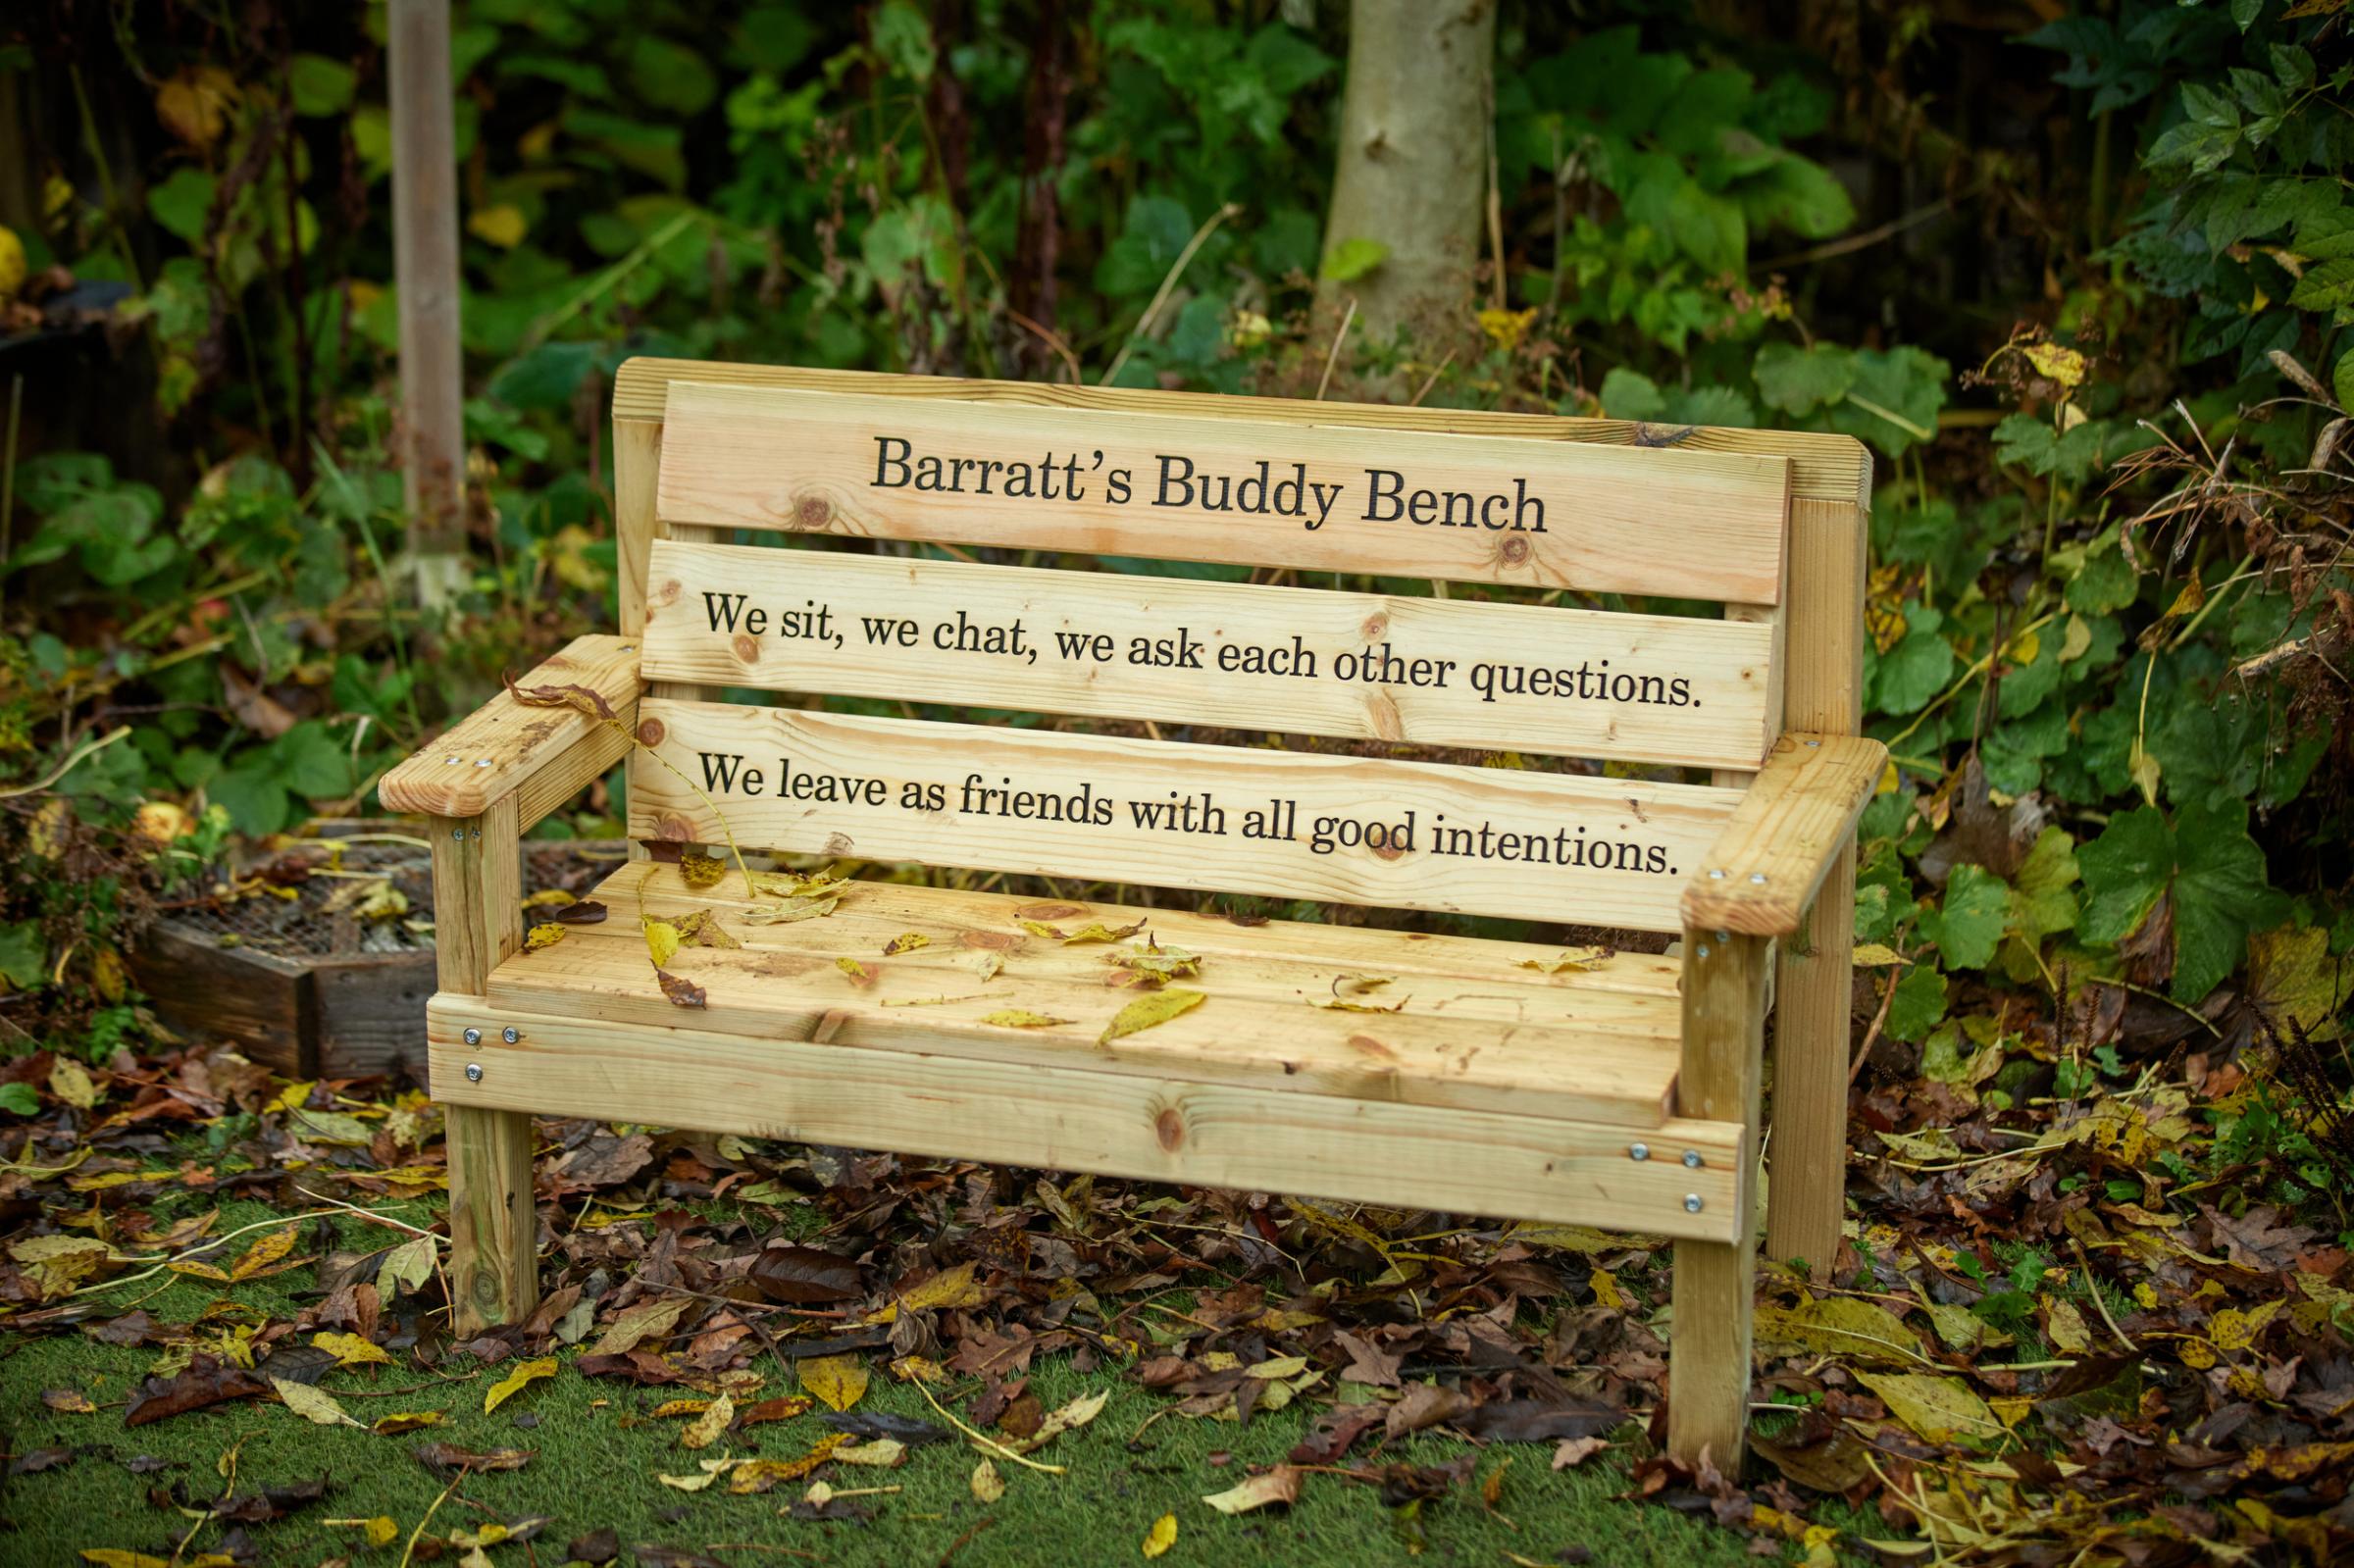 Appleton Thorn Primary School in Warrington have been donated a Barratt’s Buddy Bench from Barratt Homes